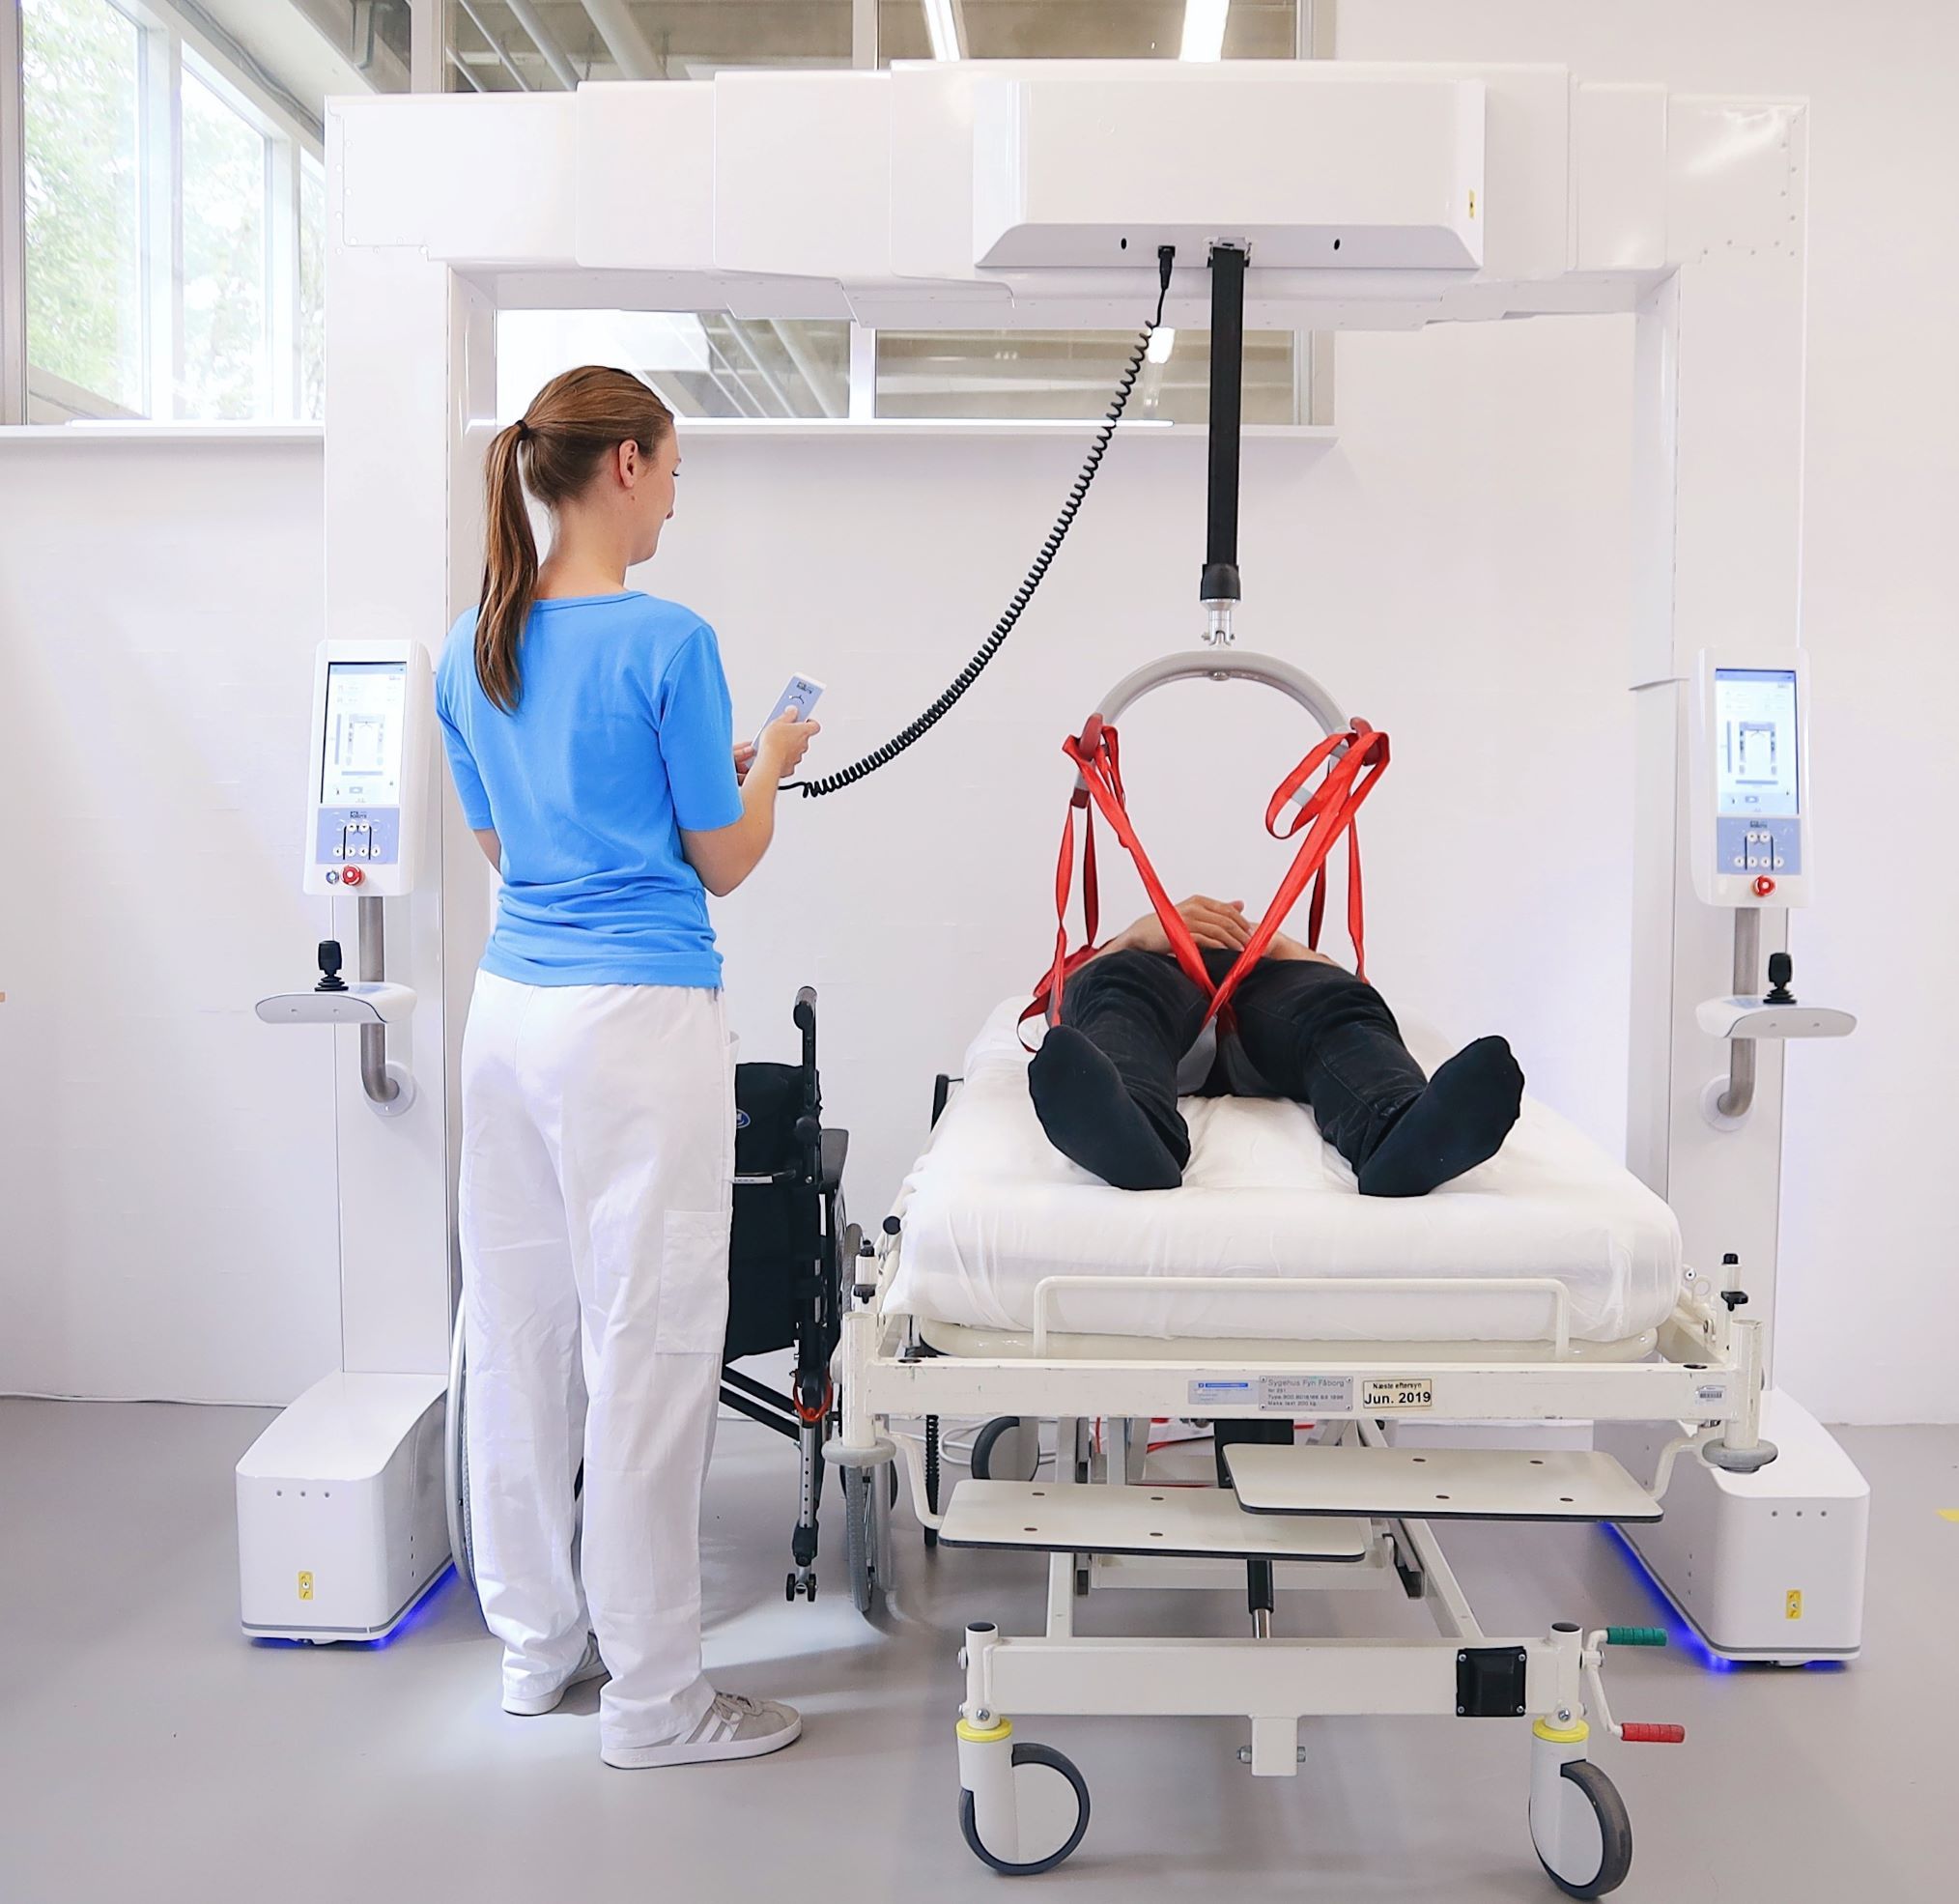 Ptr Robots Introduces World S First Mobile Lifting Robot That Both Transfers And Rehabilitates Patients Business Wire